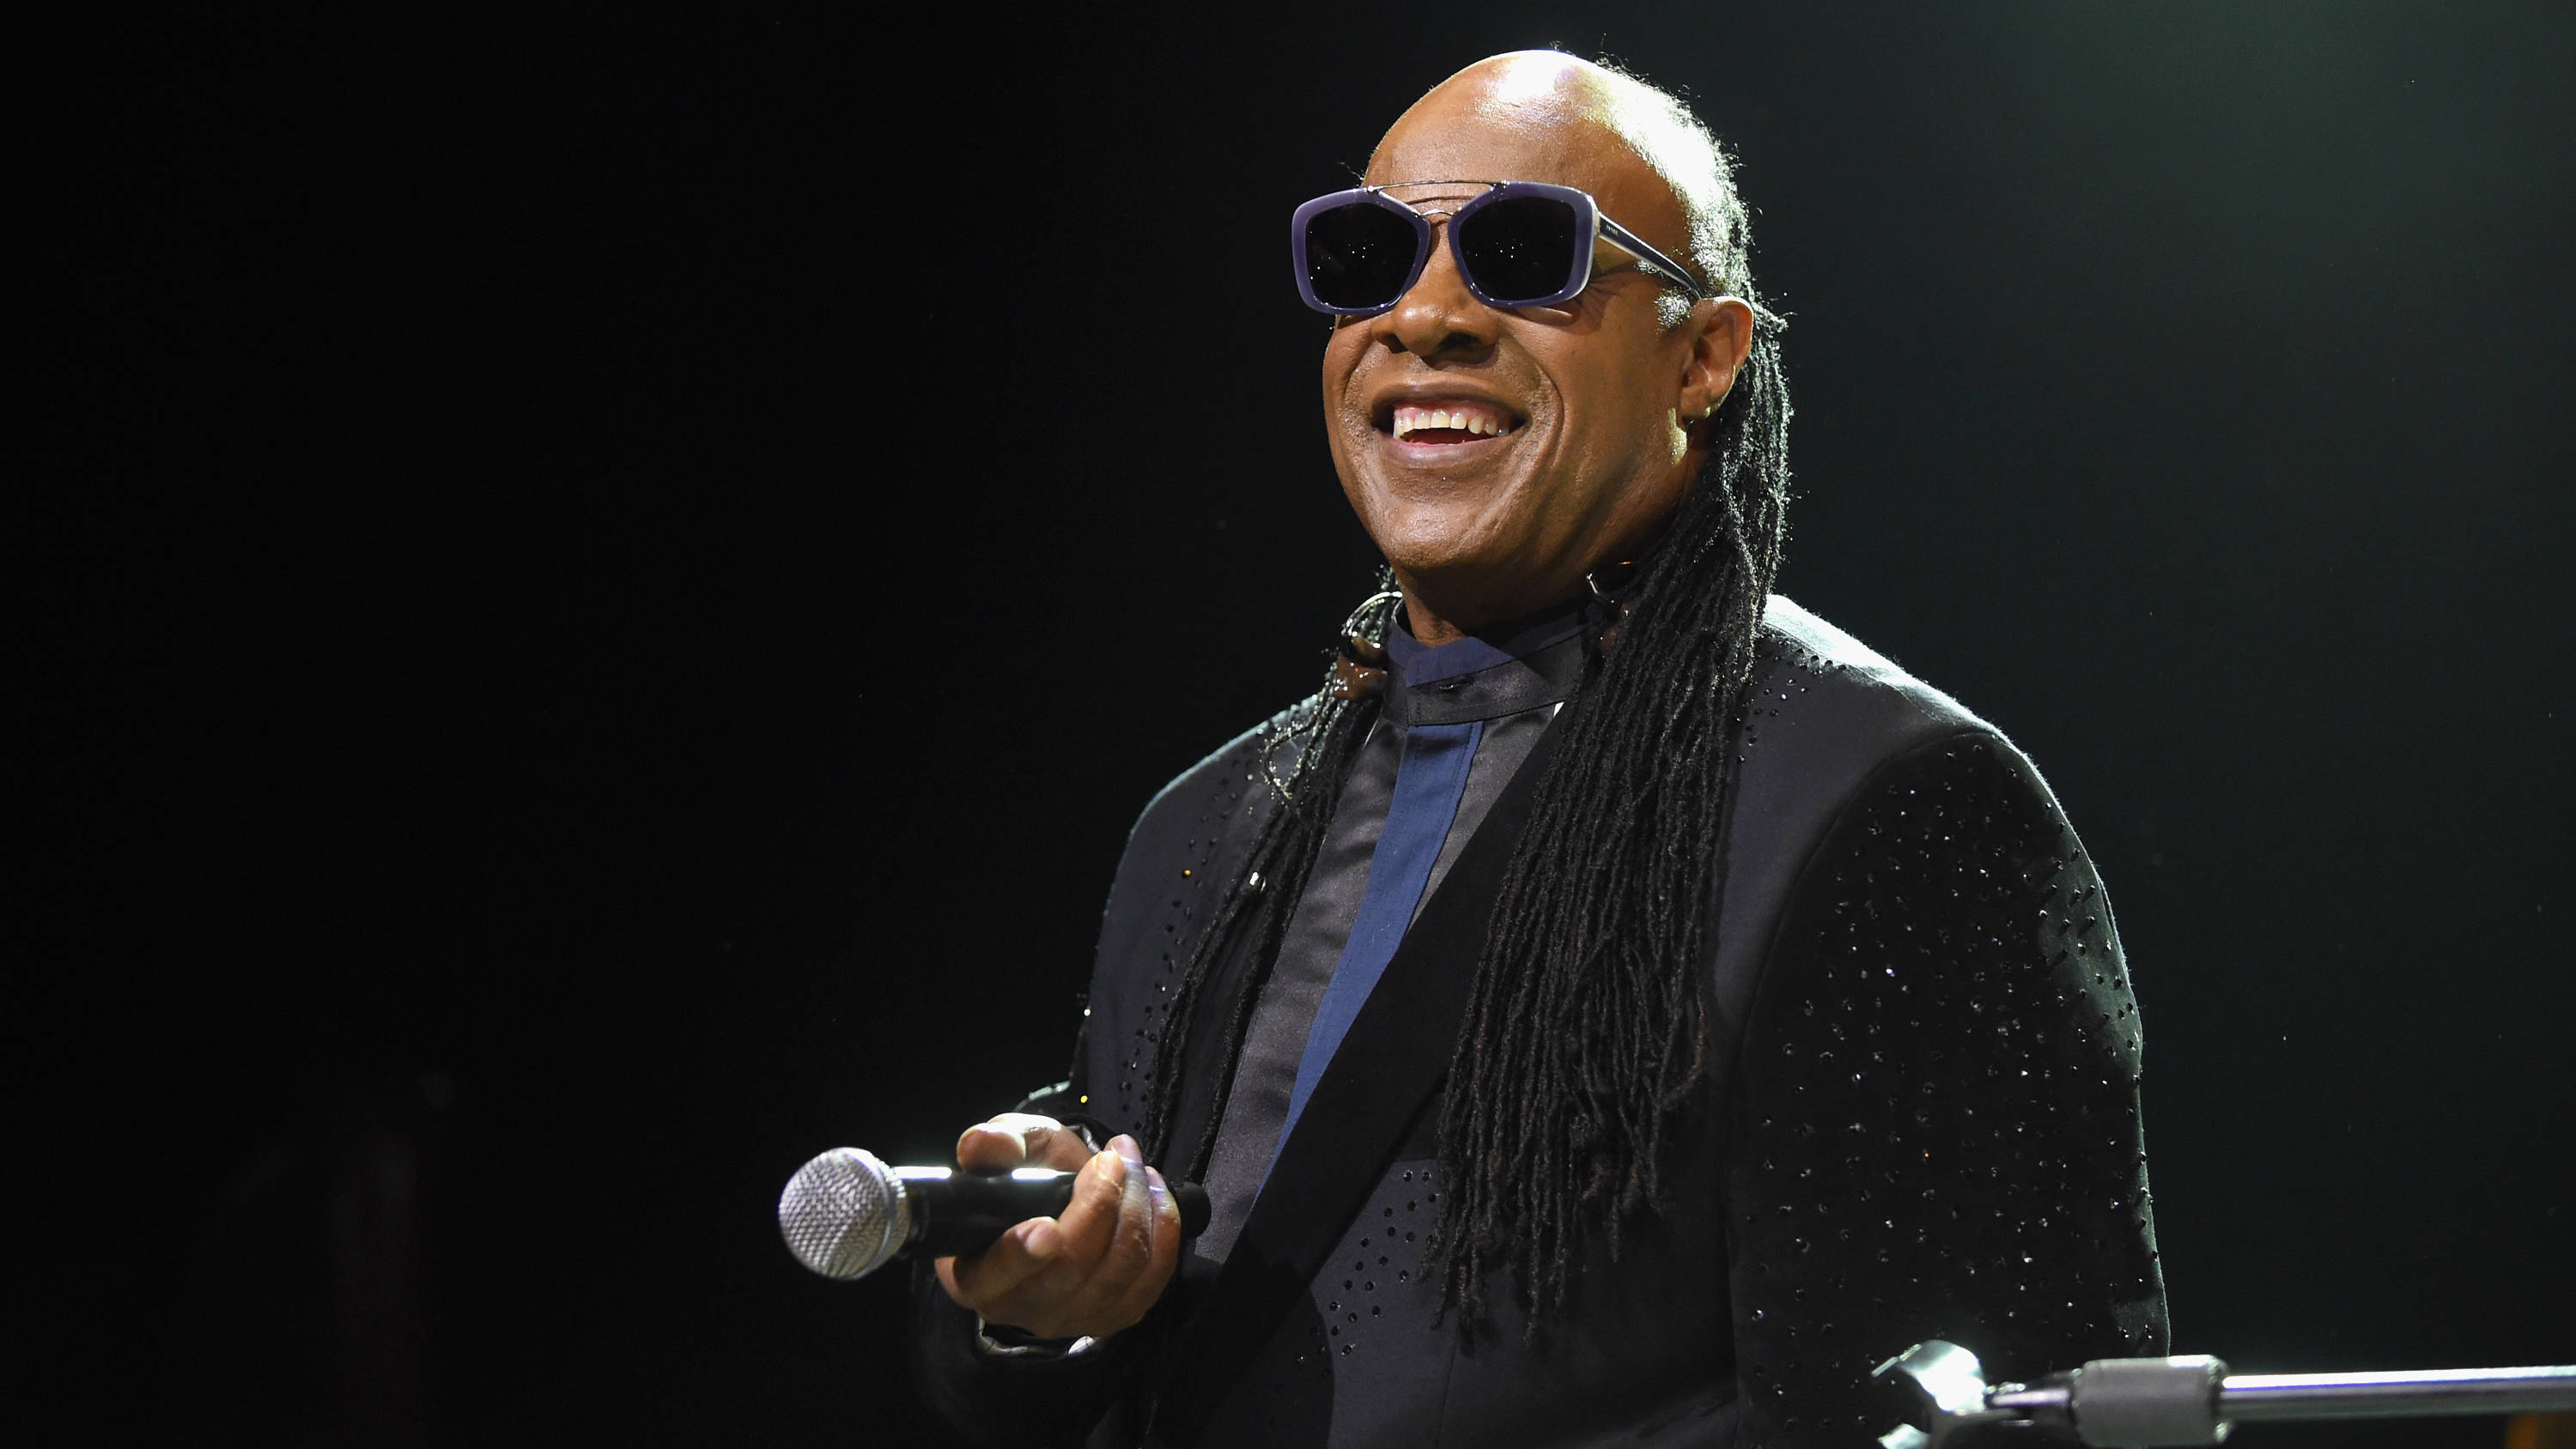 Stevie Wonder - Top 20 Greatest Songs, Net Worth, Awards And Facts